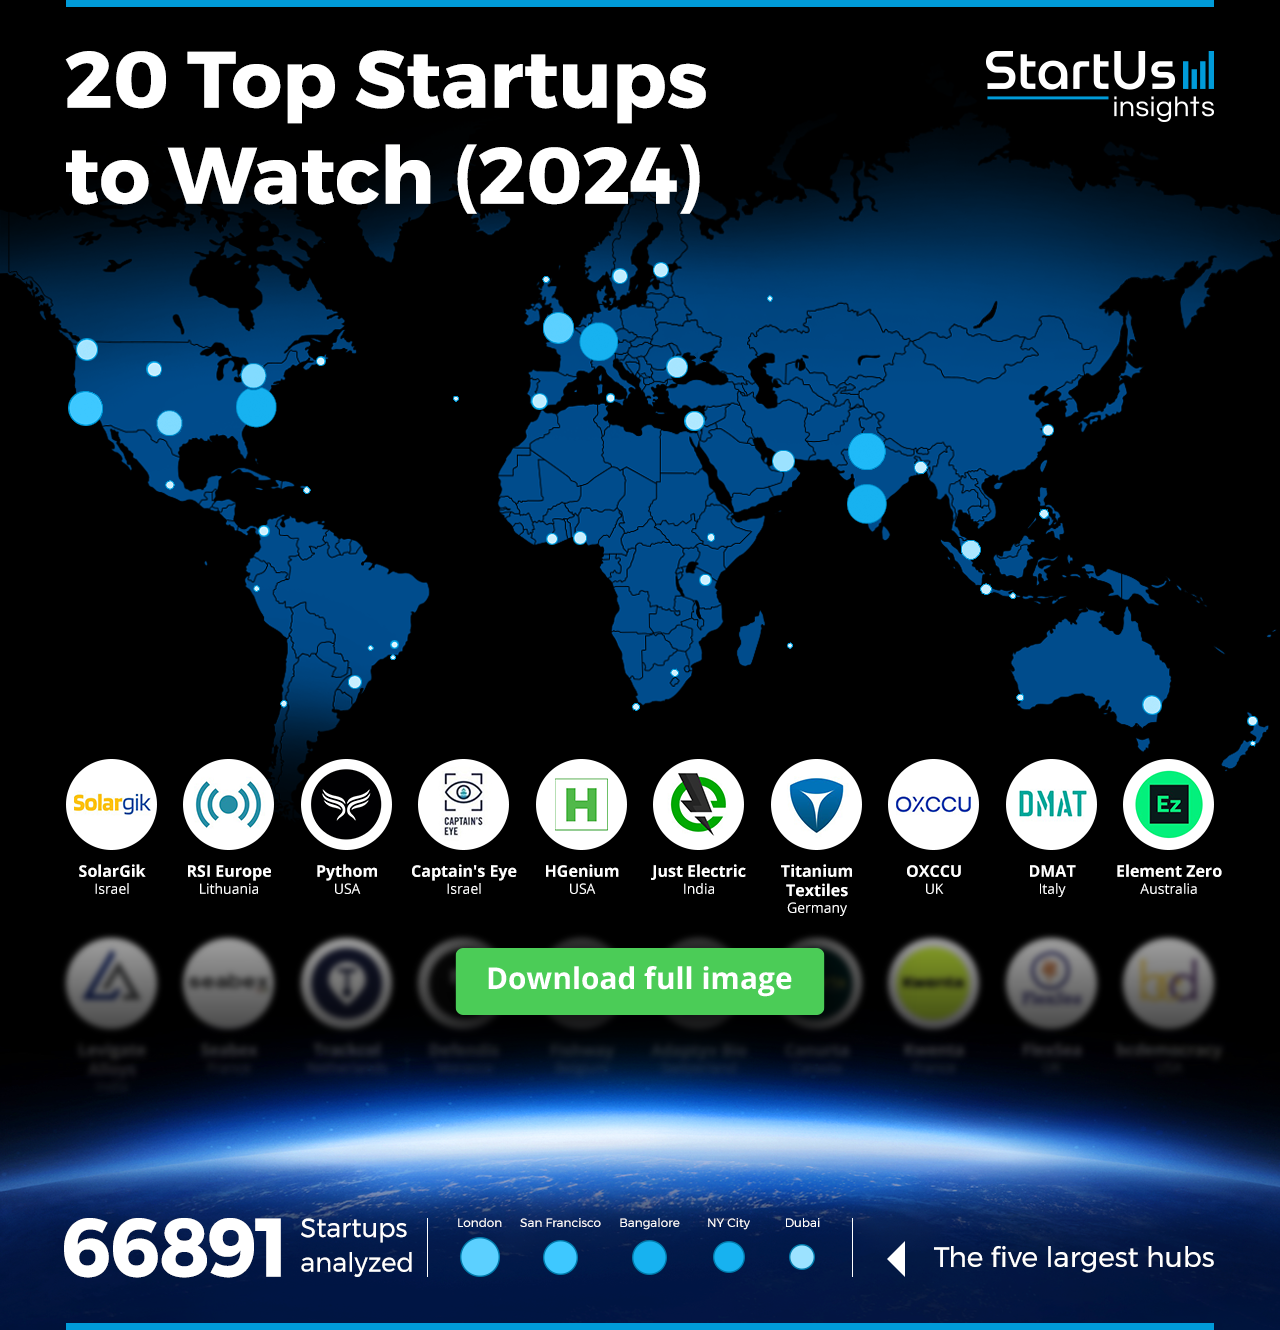 Top-Startups-to-Watch-Heat-Map-Blurred-StartUs-Insights-noresize